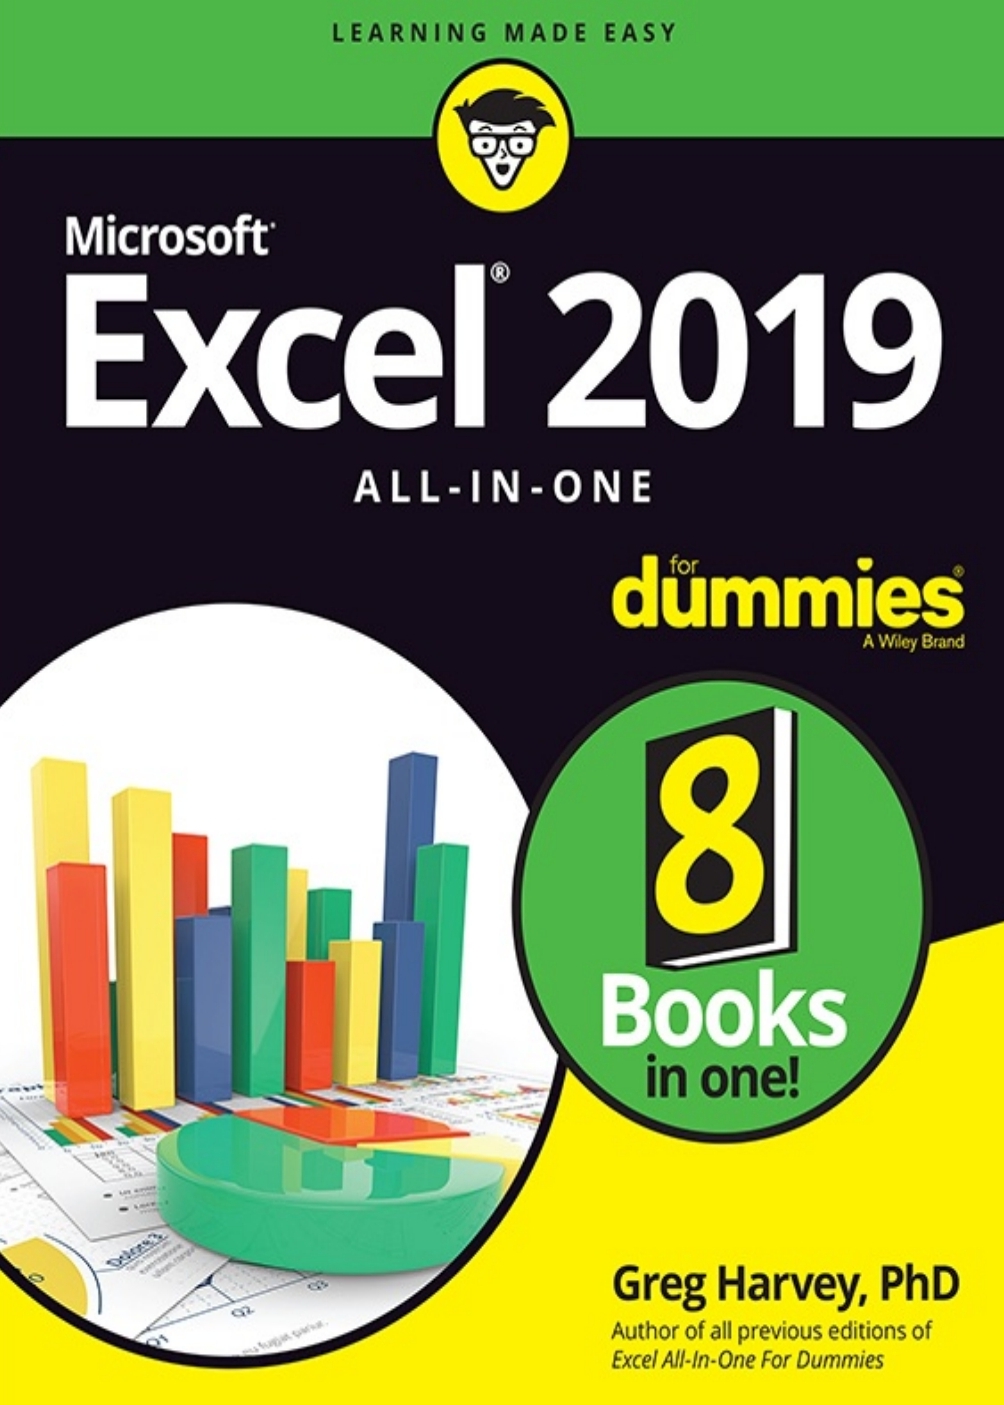 Microsoft EXCEL 2019 All in one for Dummies